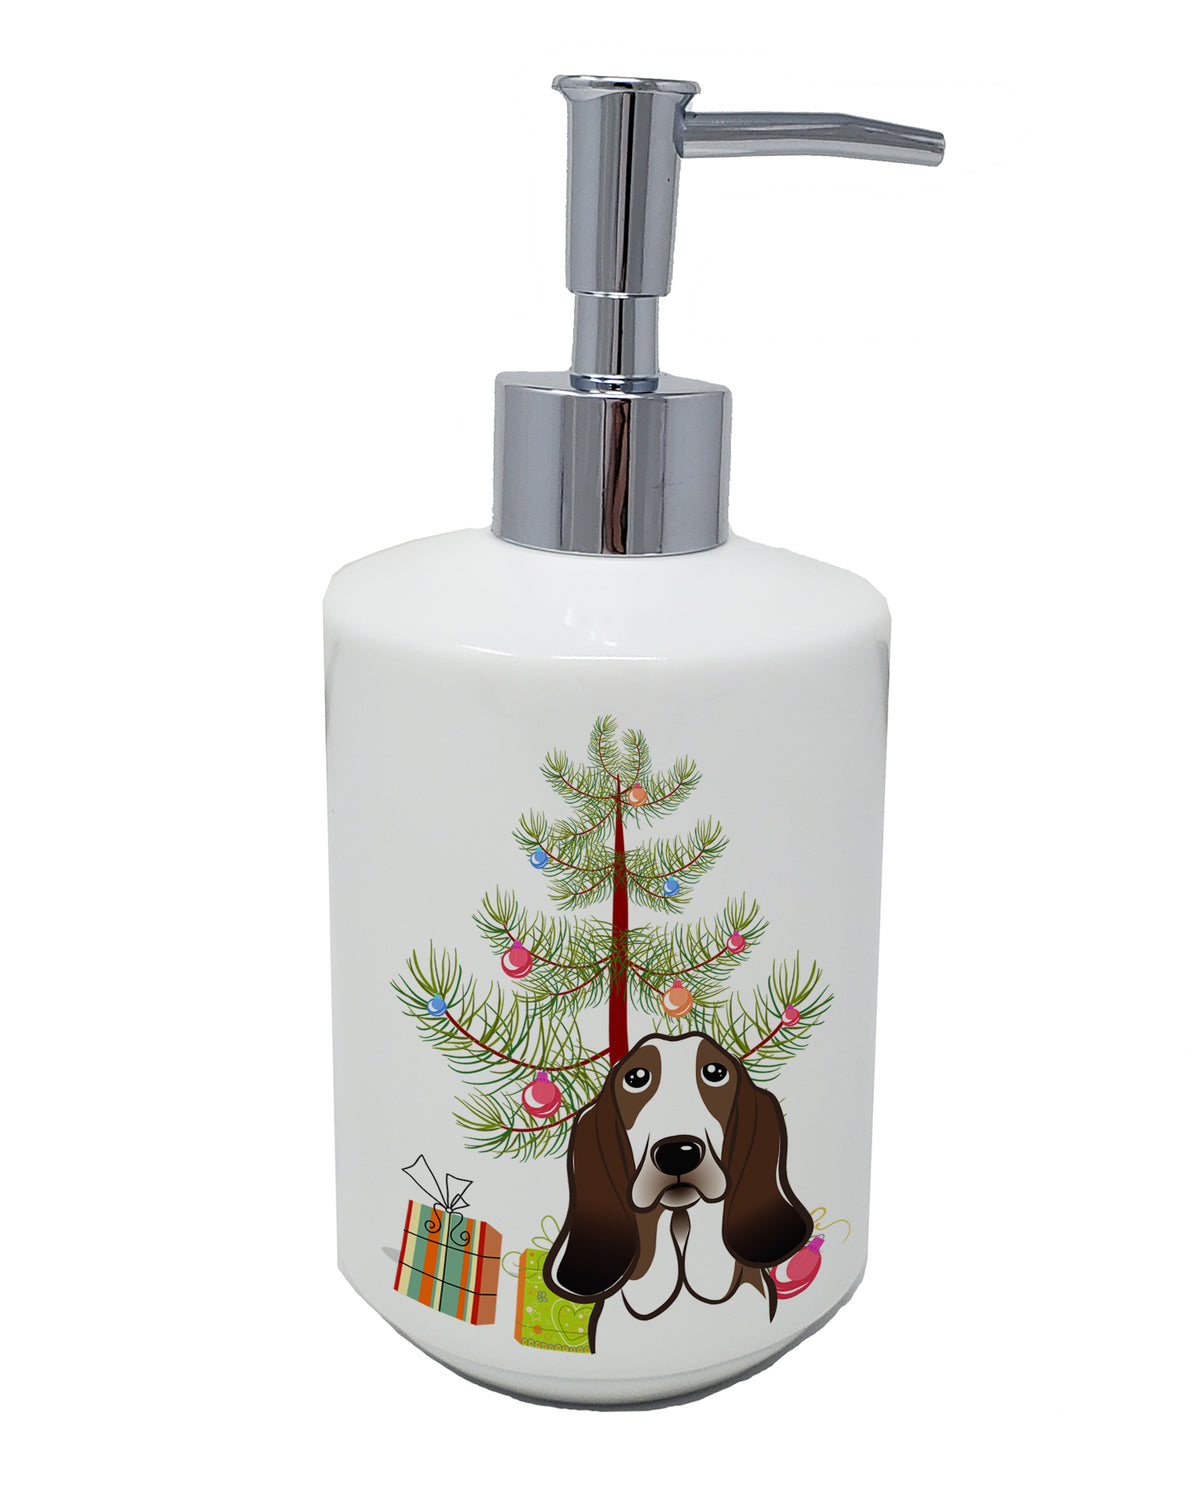 Buy this Christmas Tree and Basset Hound Ceramic Soap Dispenser